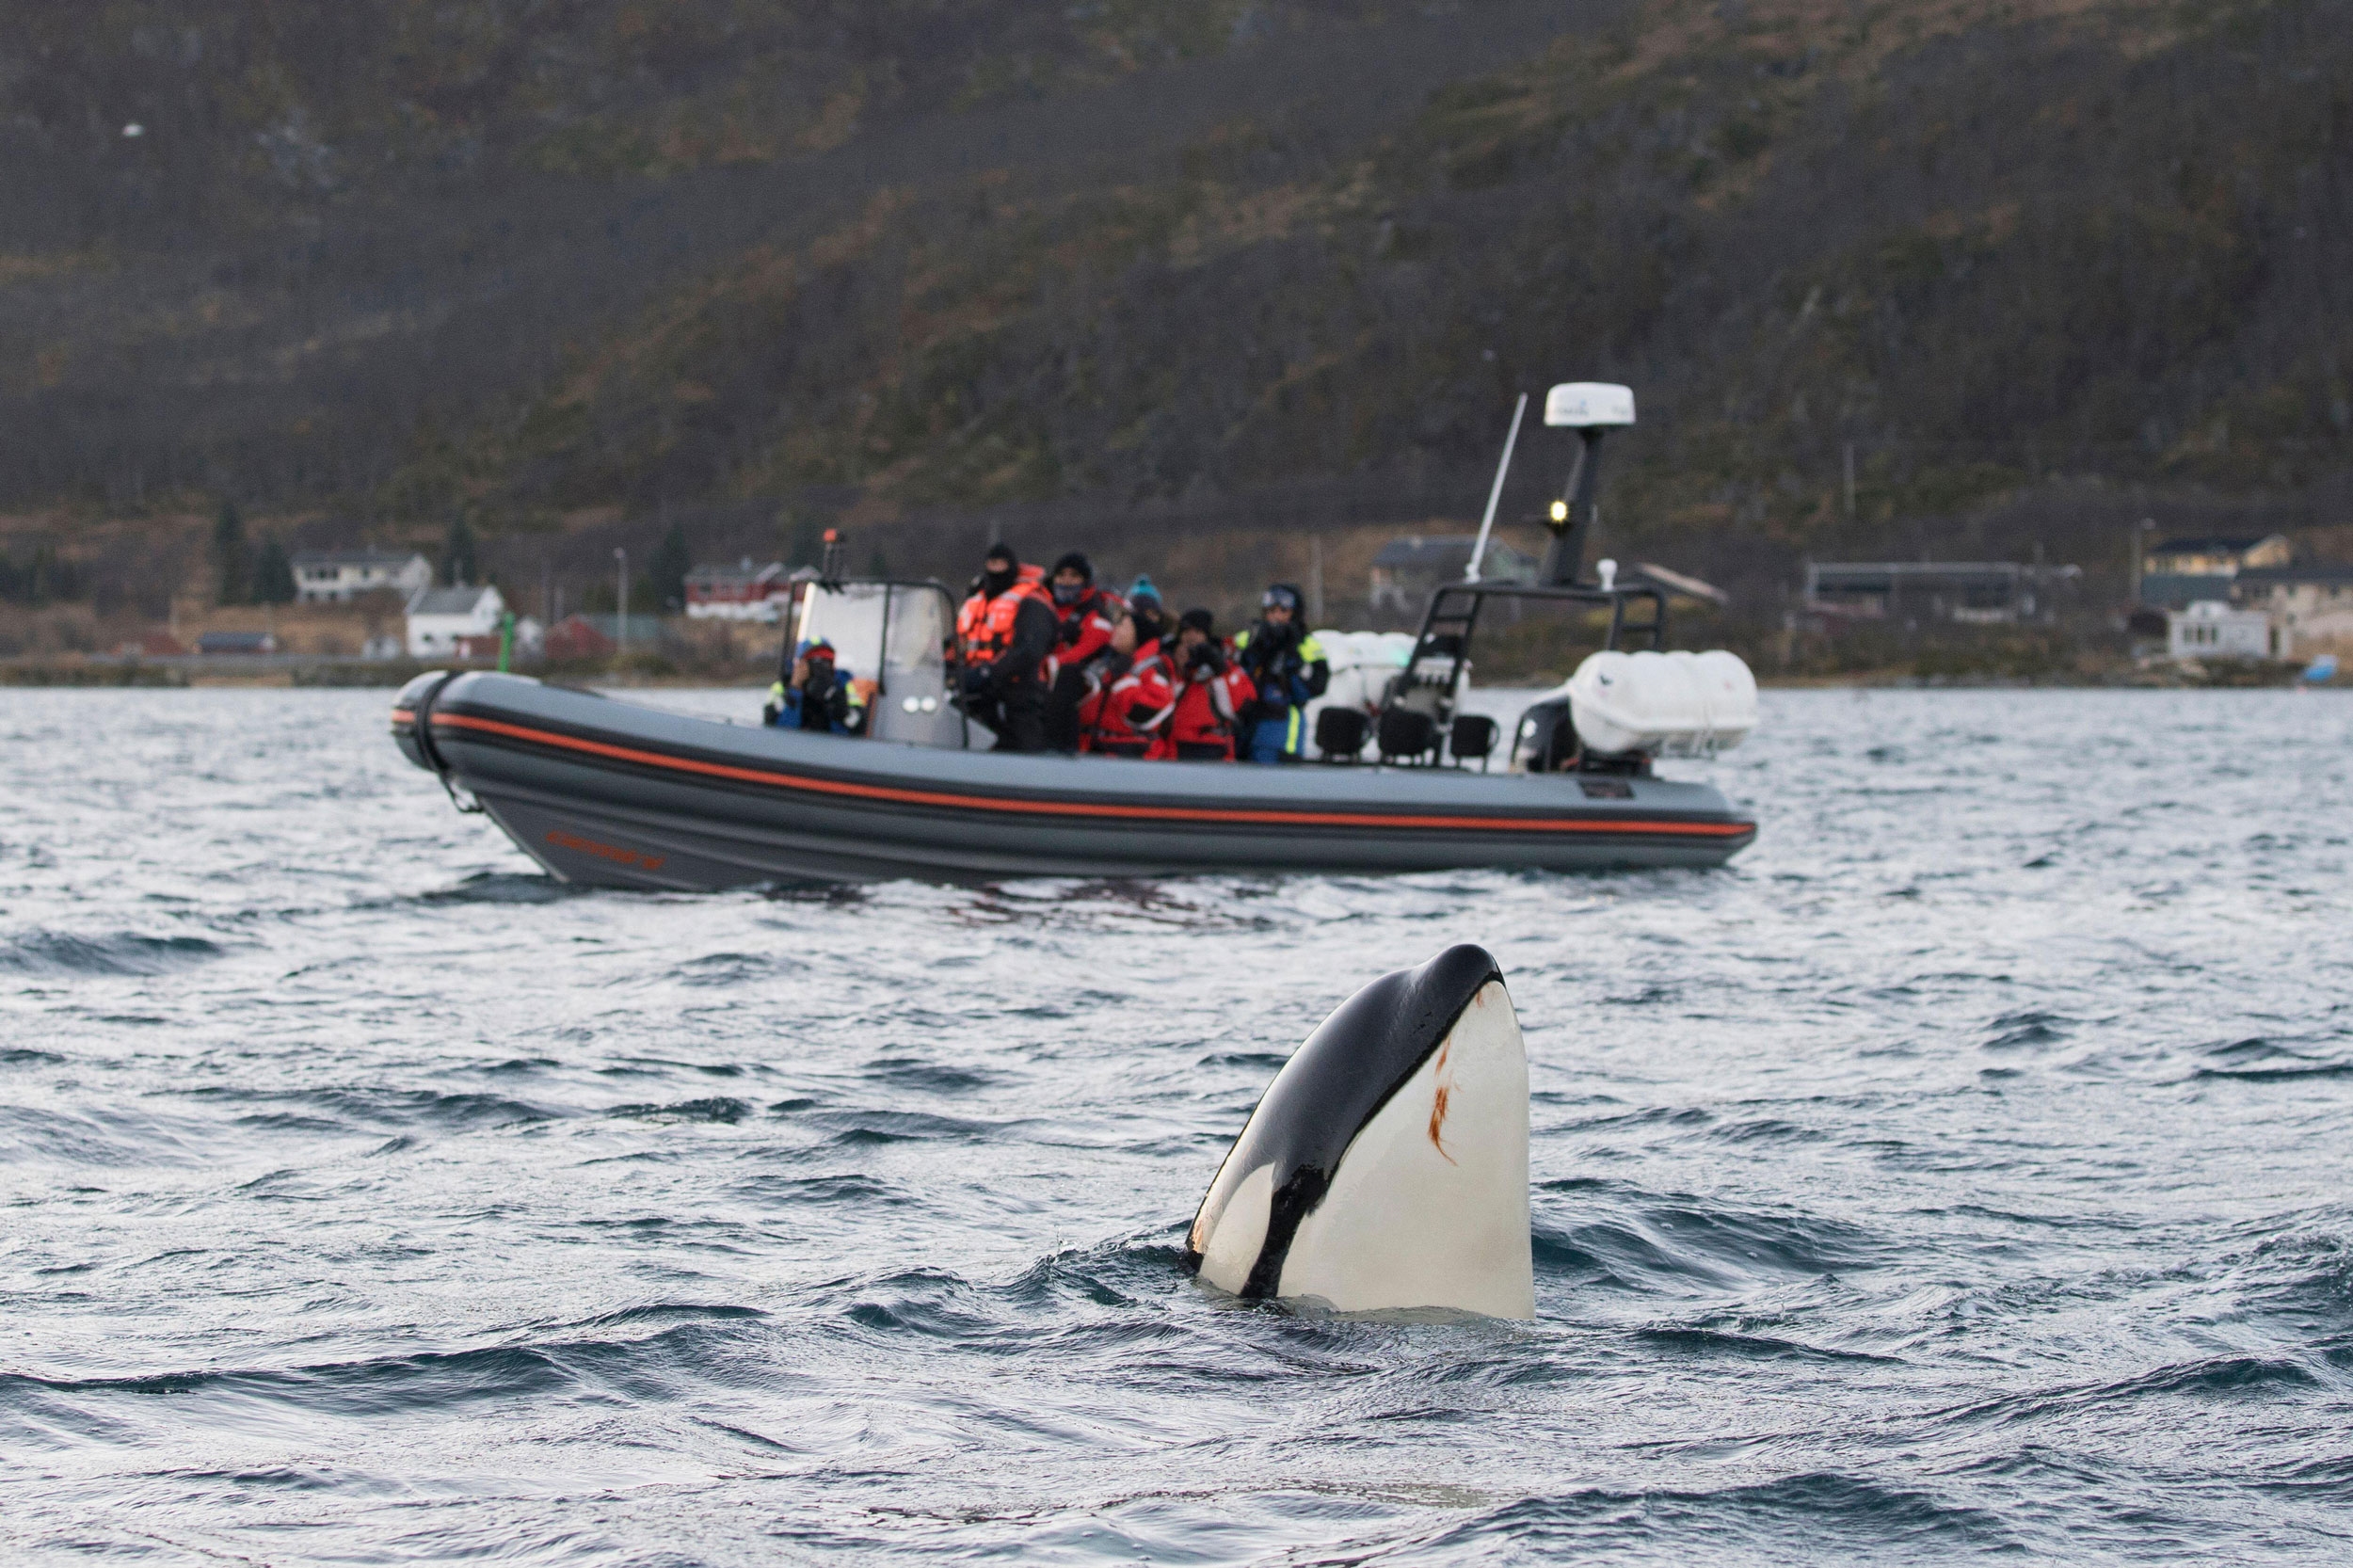 An orca sticks their head above the water to peer at a boat in the water close to them.